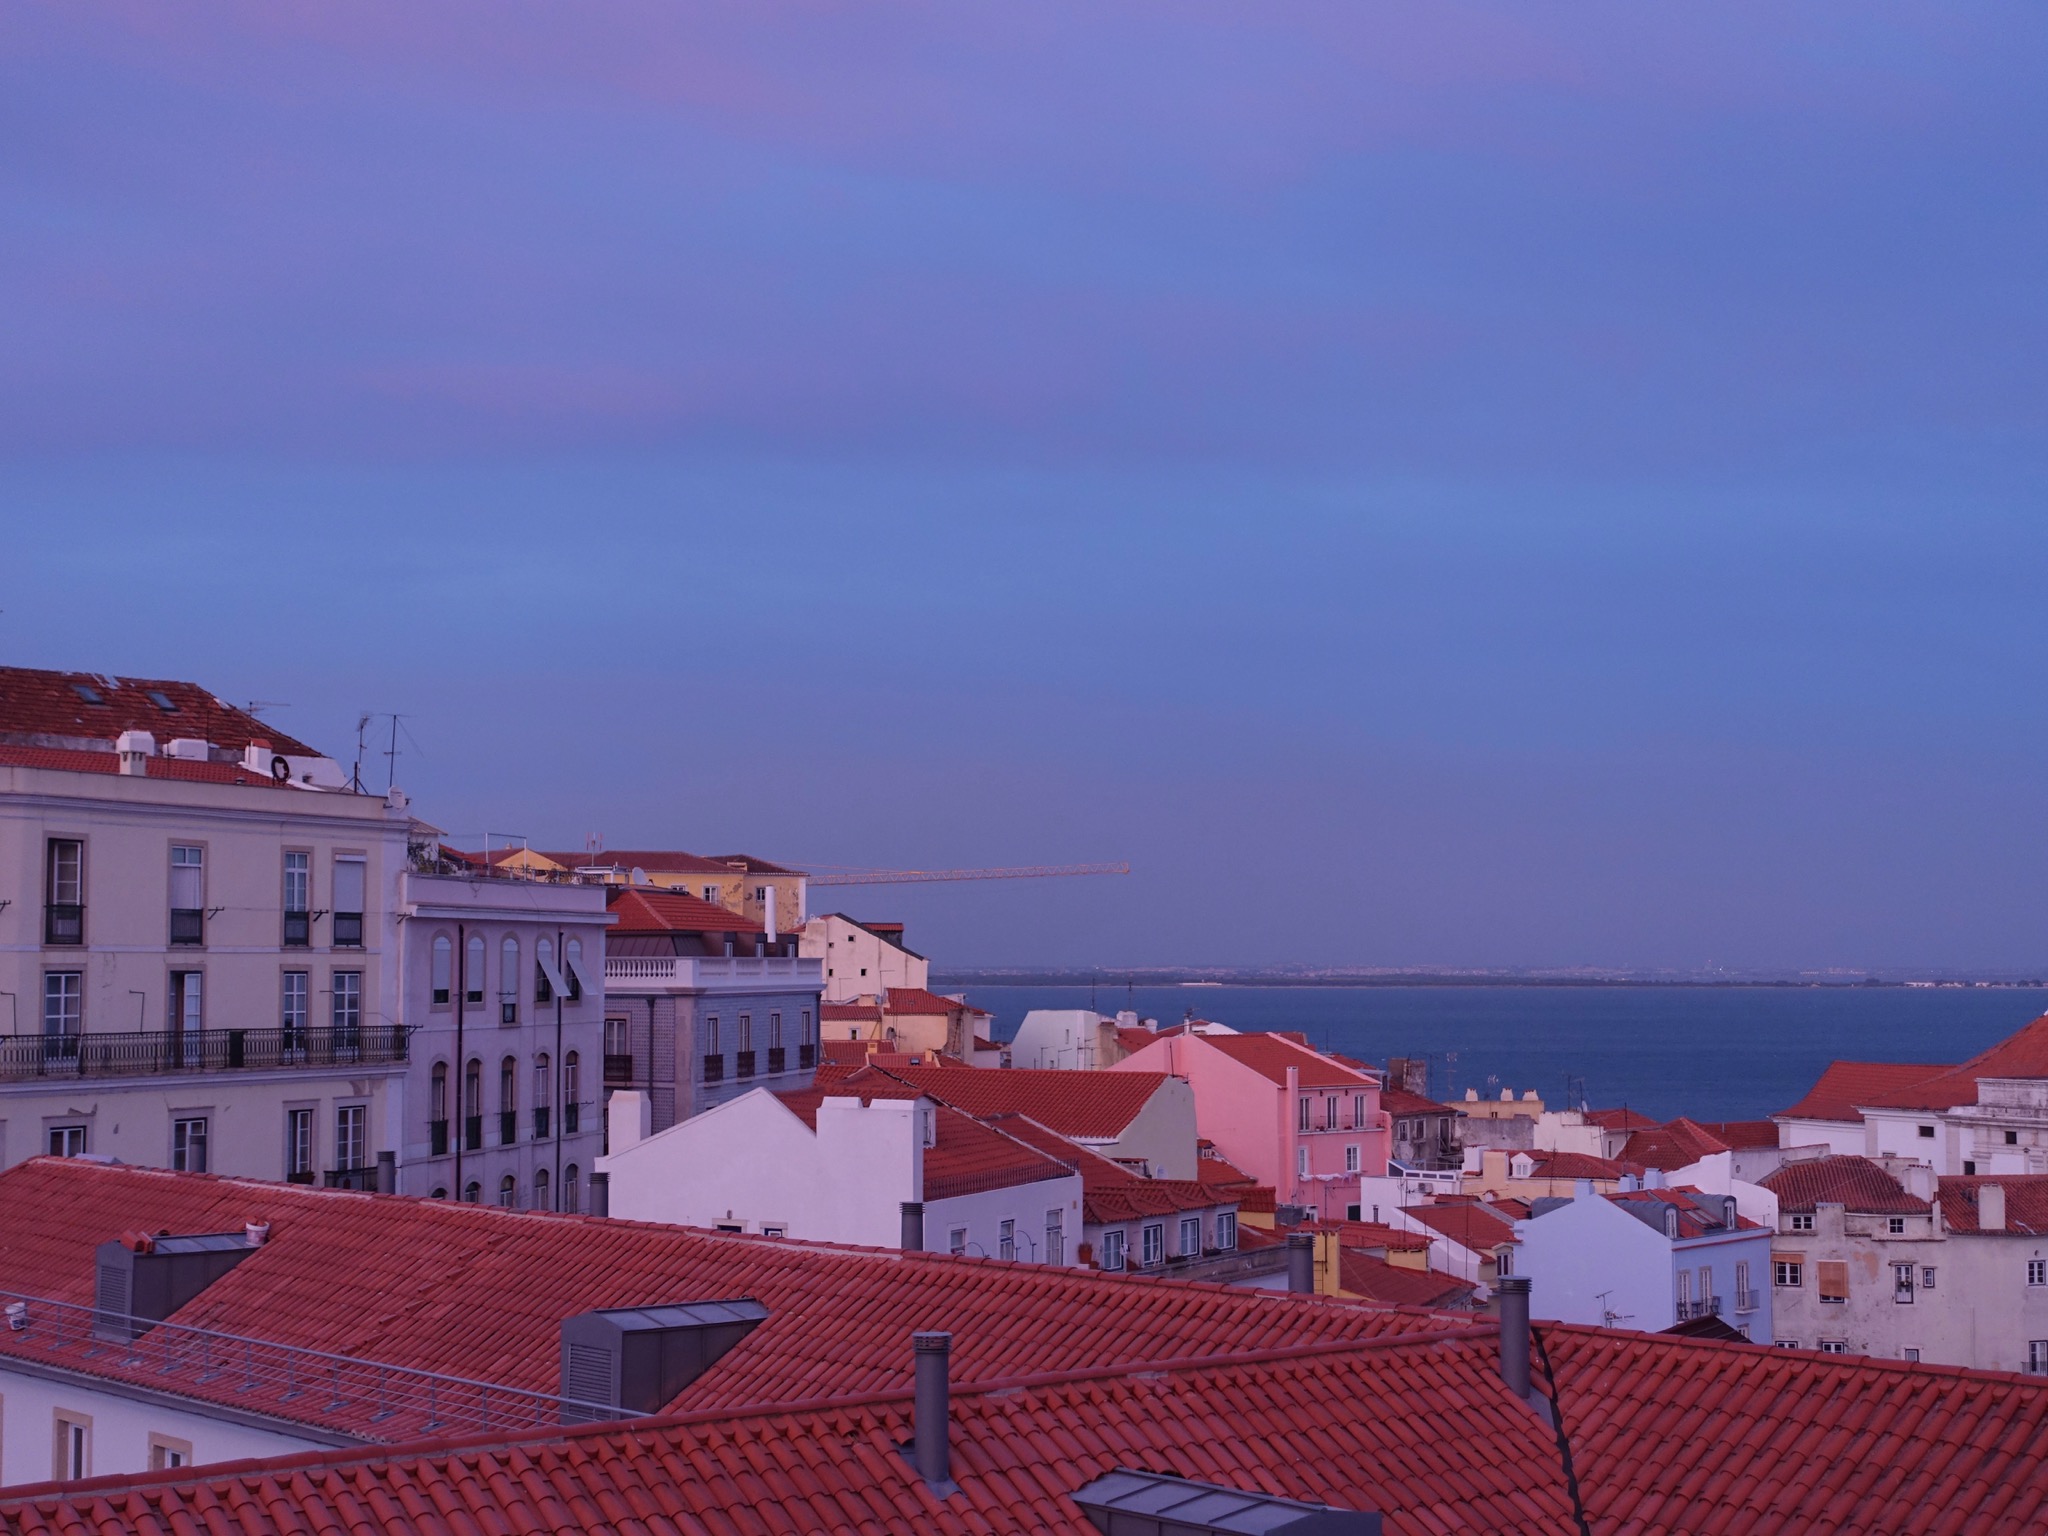 Photo 16 of 86 from the album Highlights Lisbon 2015.